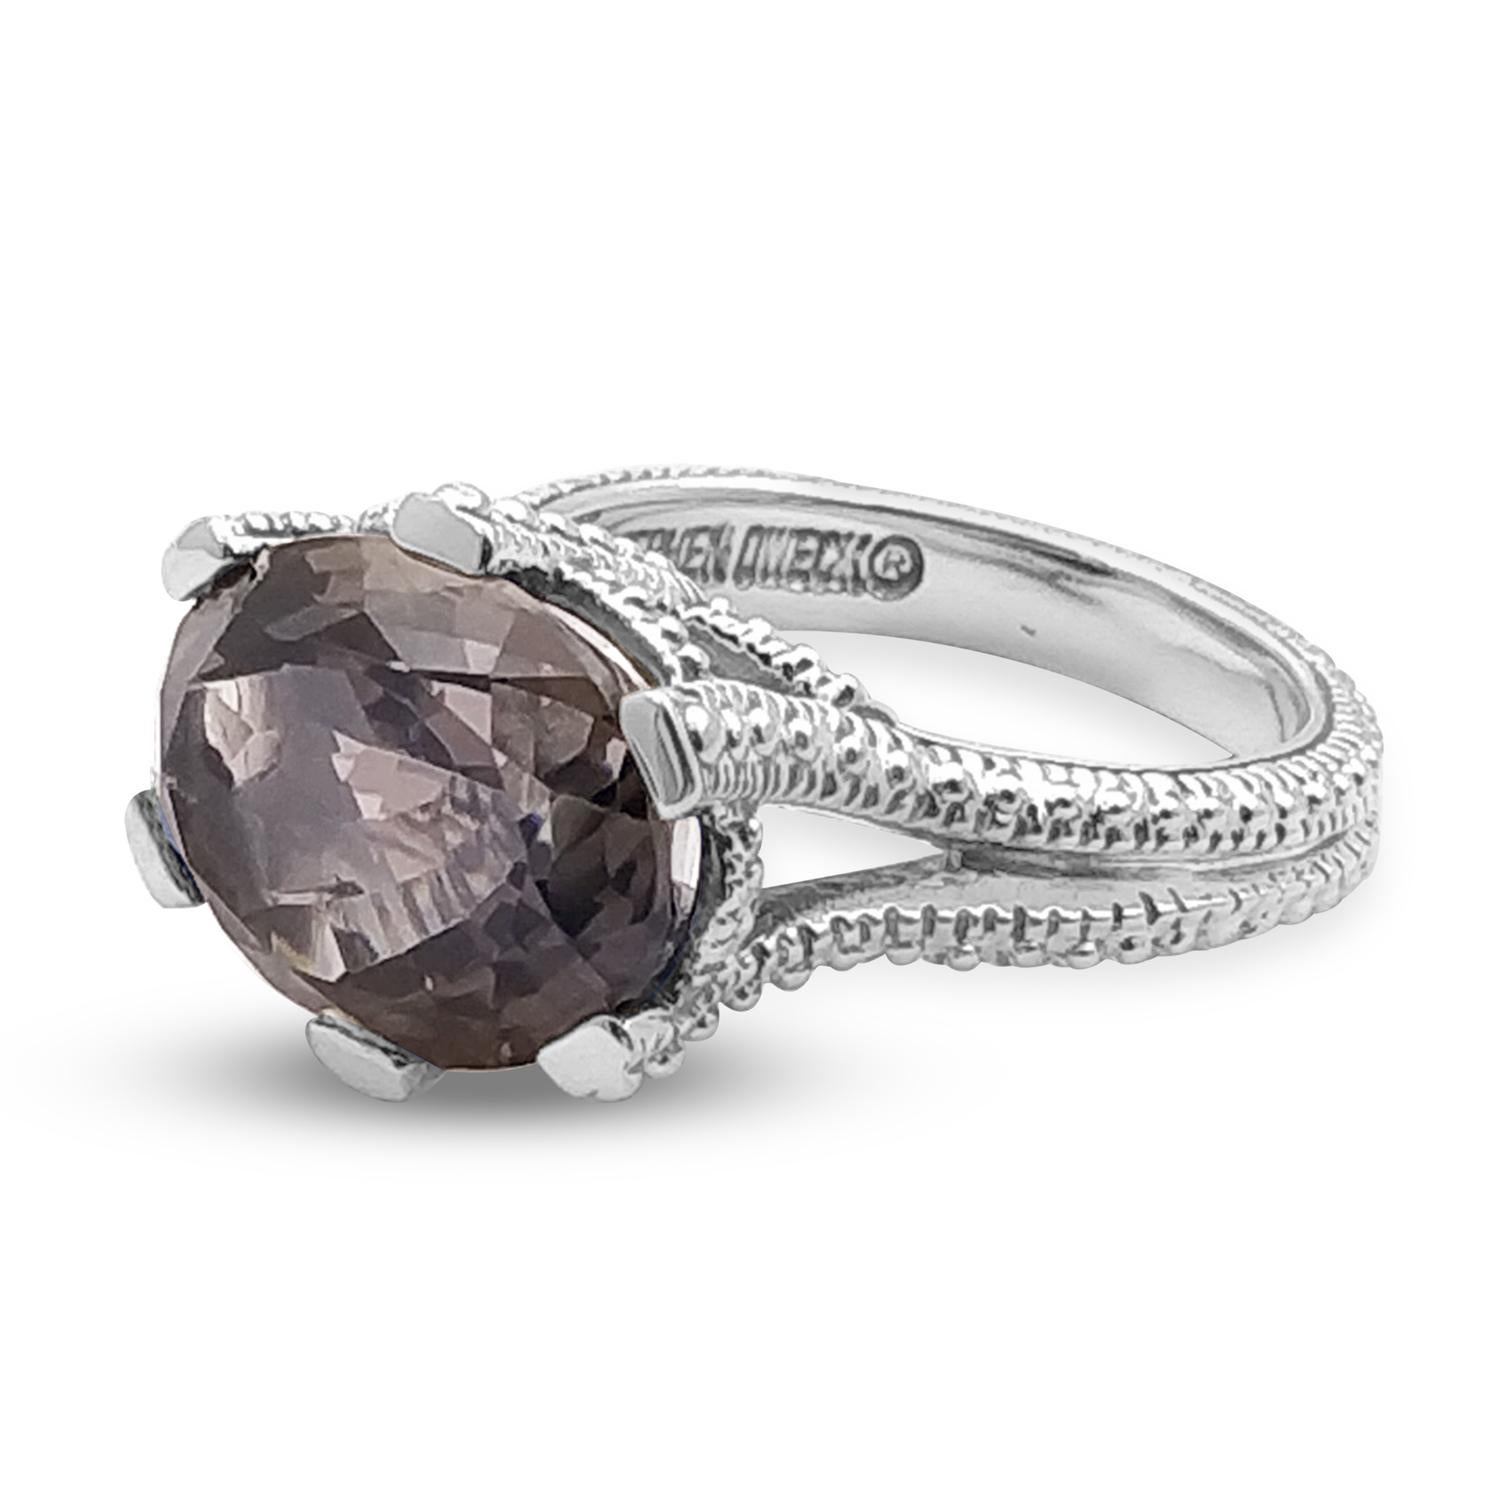 Step into the enchanting world of Steven's Jewelry with the 16 x 12 Oval Regular Facet Gemstone Smokey Quartz Ring from the Garden of Stephen Collection. Crafted with meticulous attention to detail in 925 sterling silver, this ring measures 0.64